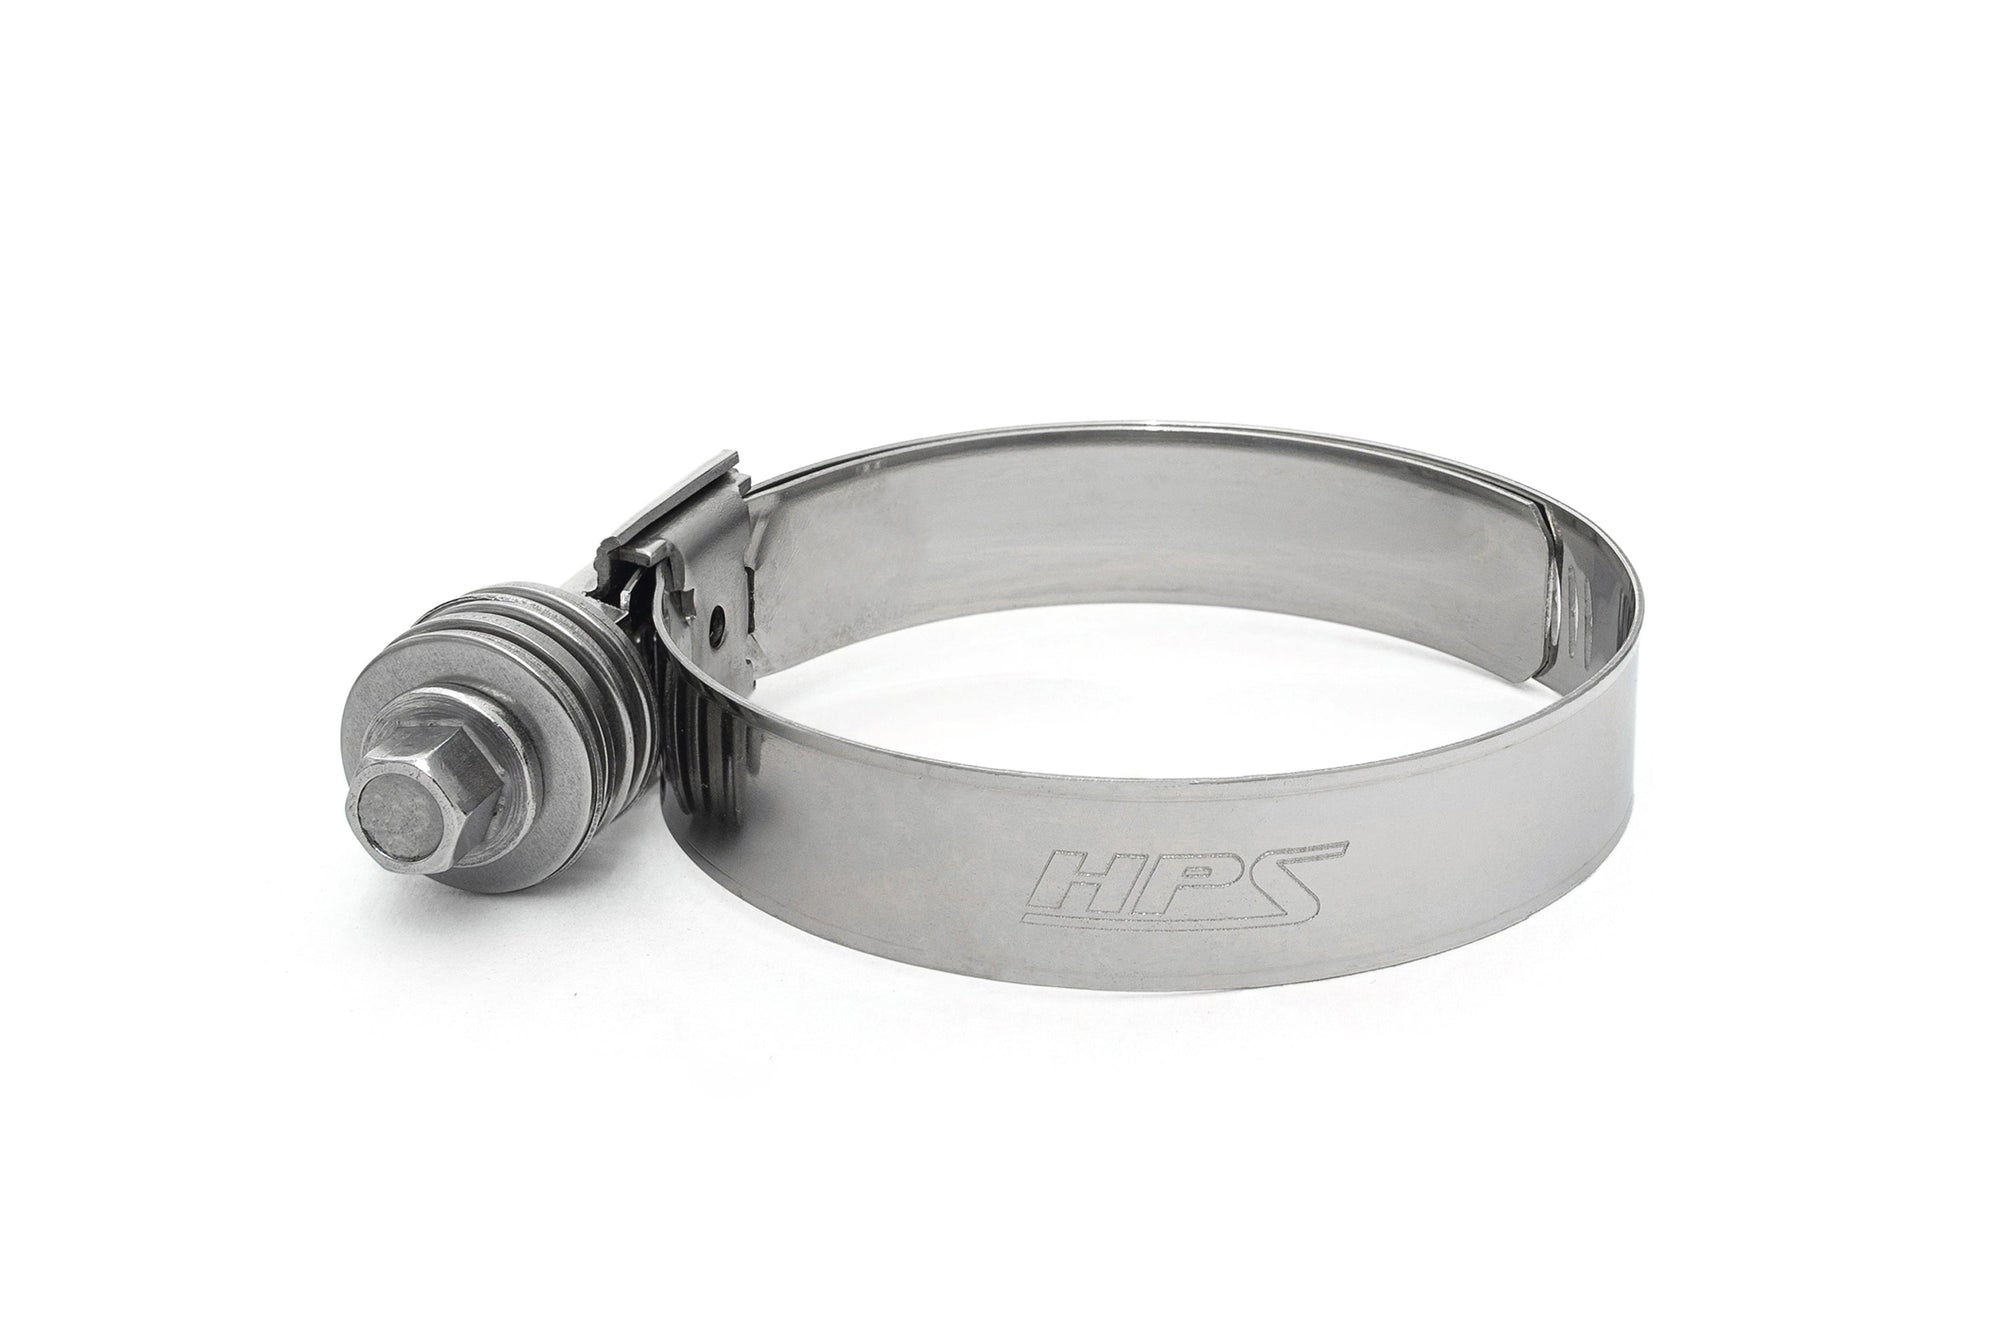 HPS Stainless Steel Heavy Duty Constant Tension Hose Clamp CTHD-612 fits 5-1/2" inch silicone hose charge air intake turbo cac intercooler pipe